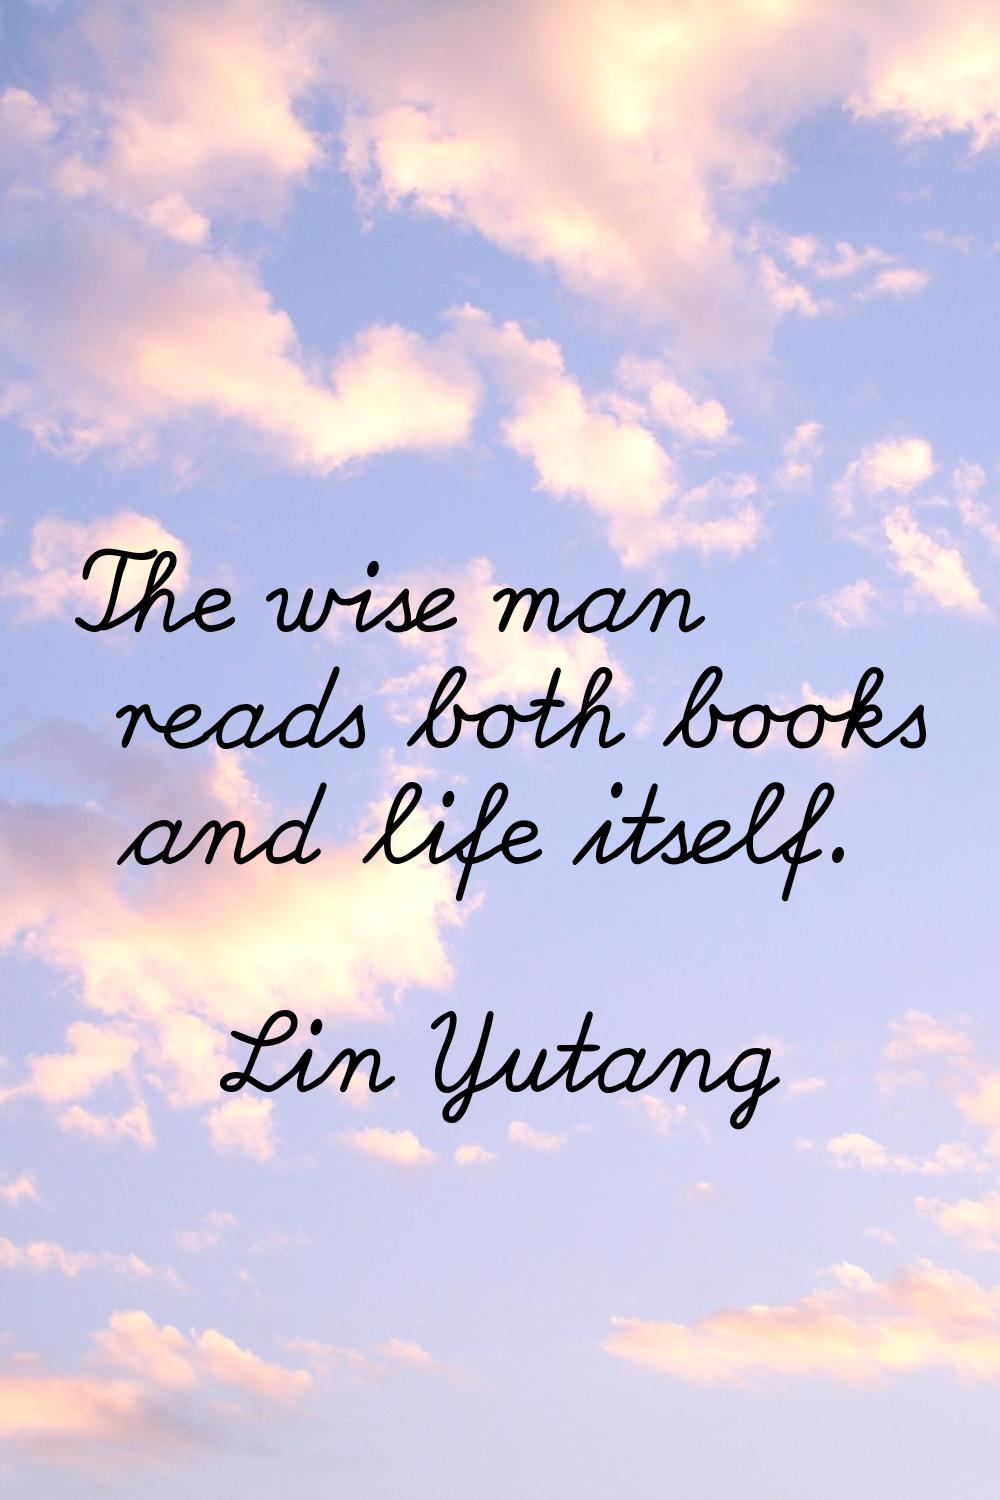 The wise man reads both books and life itself.